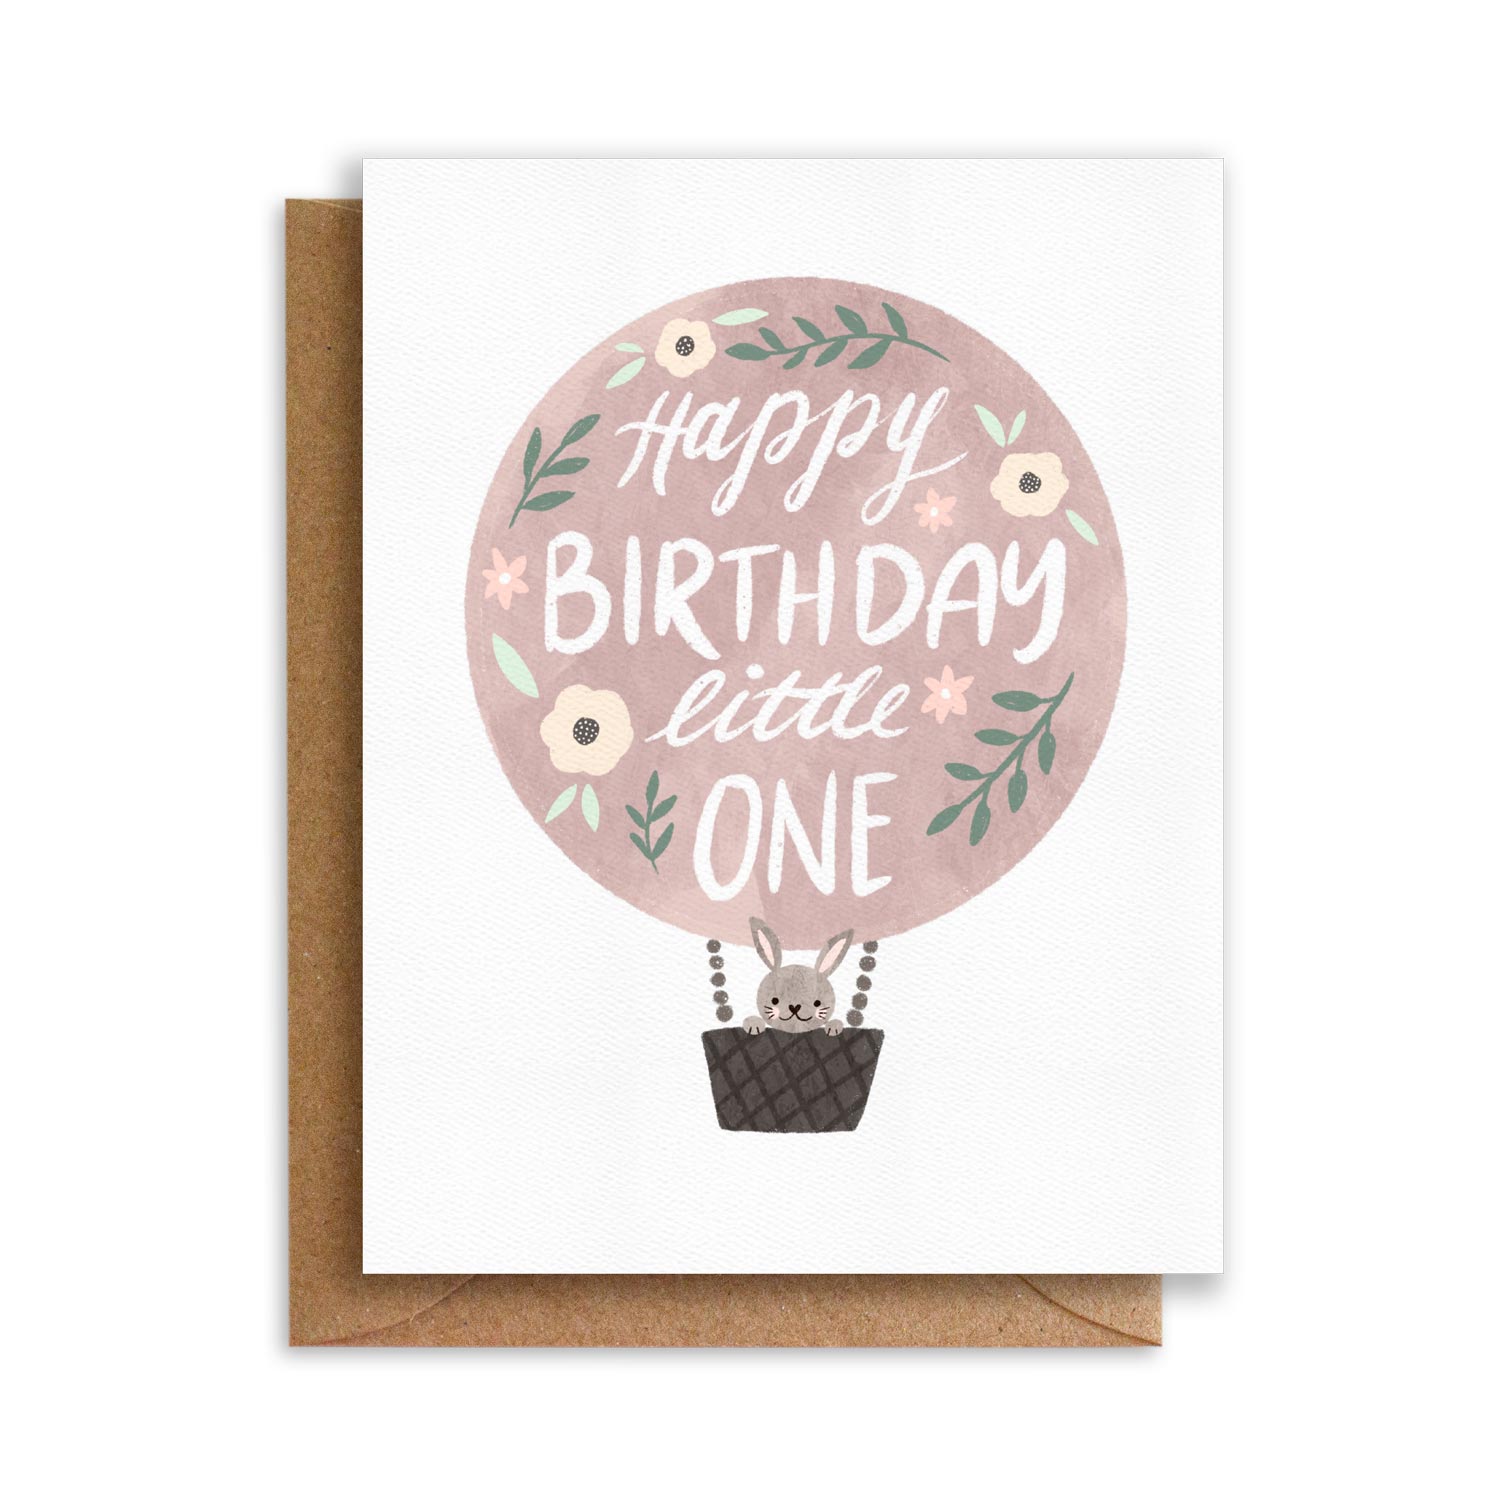 First birthday card with message happy birthday little one and a bunny in a pink hot air ballon with flowers